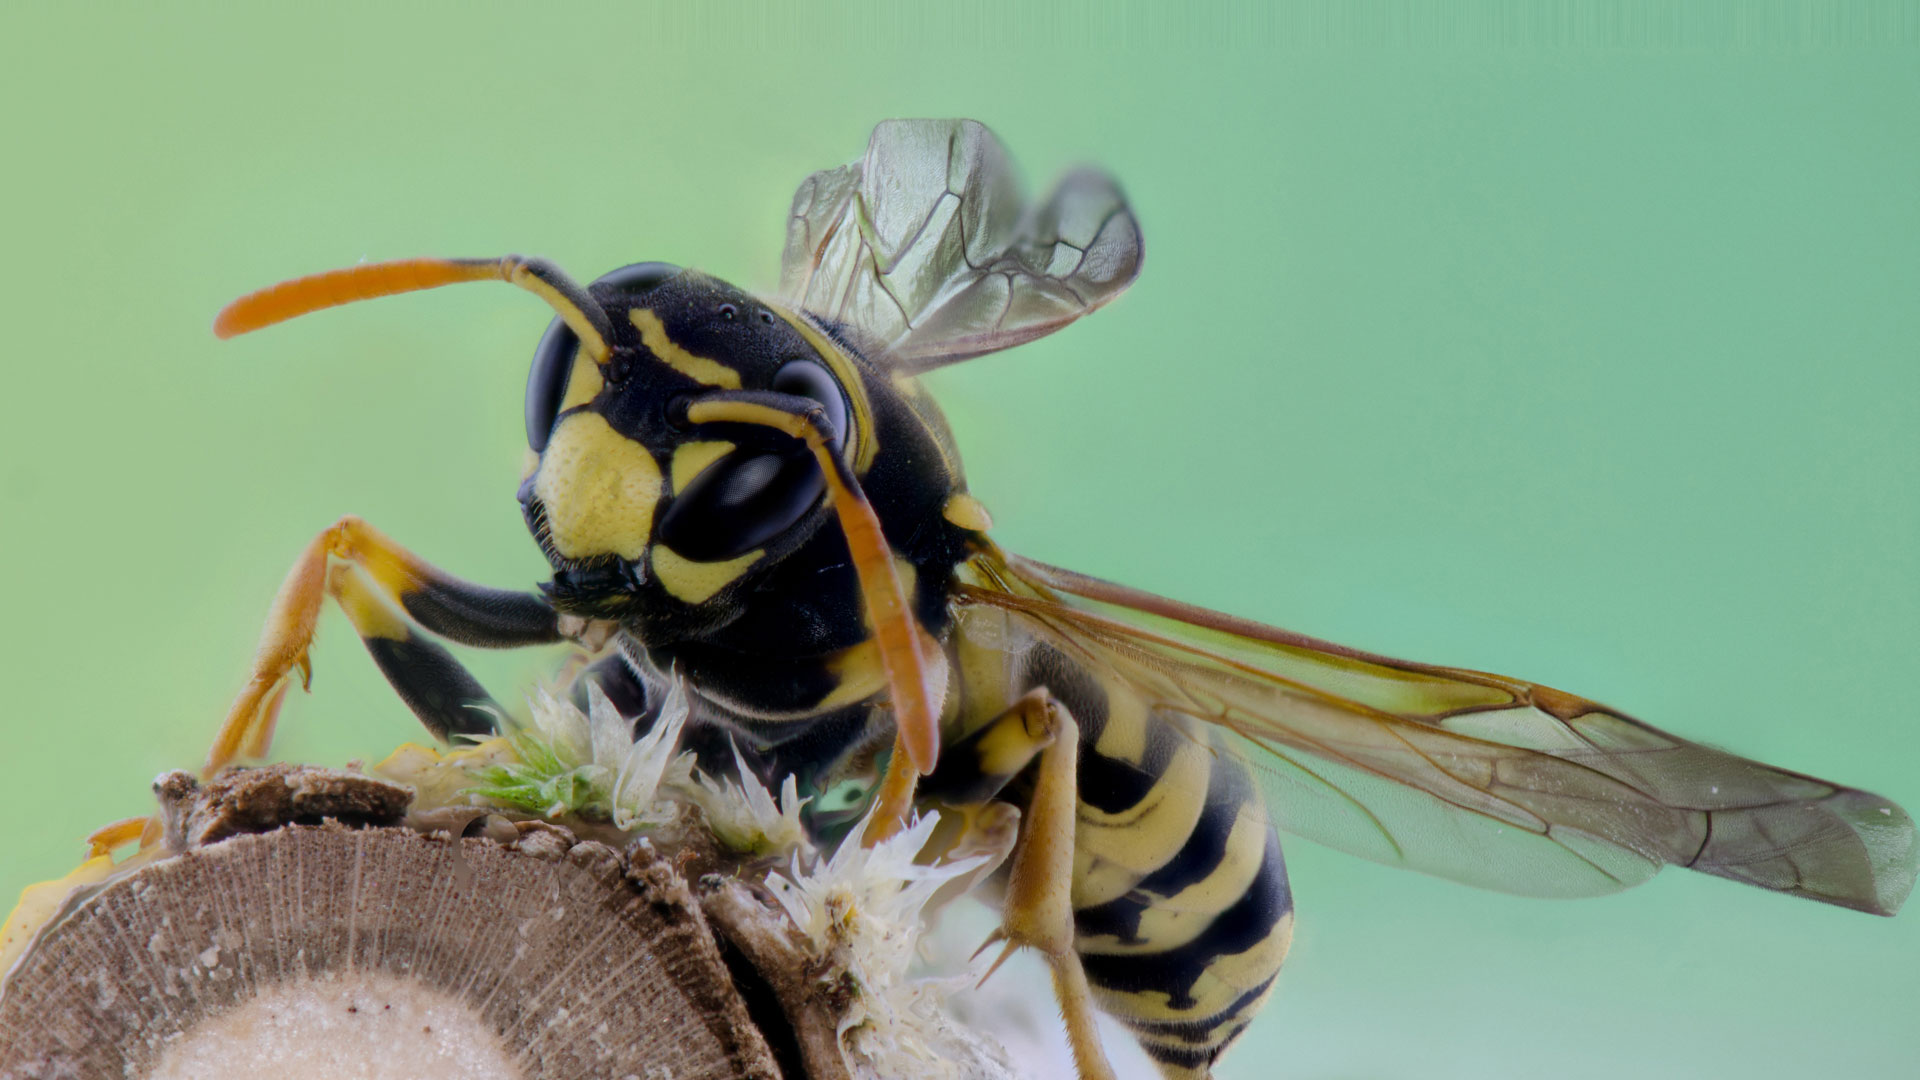 Wasps Are About: Here's What To Do About Them